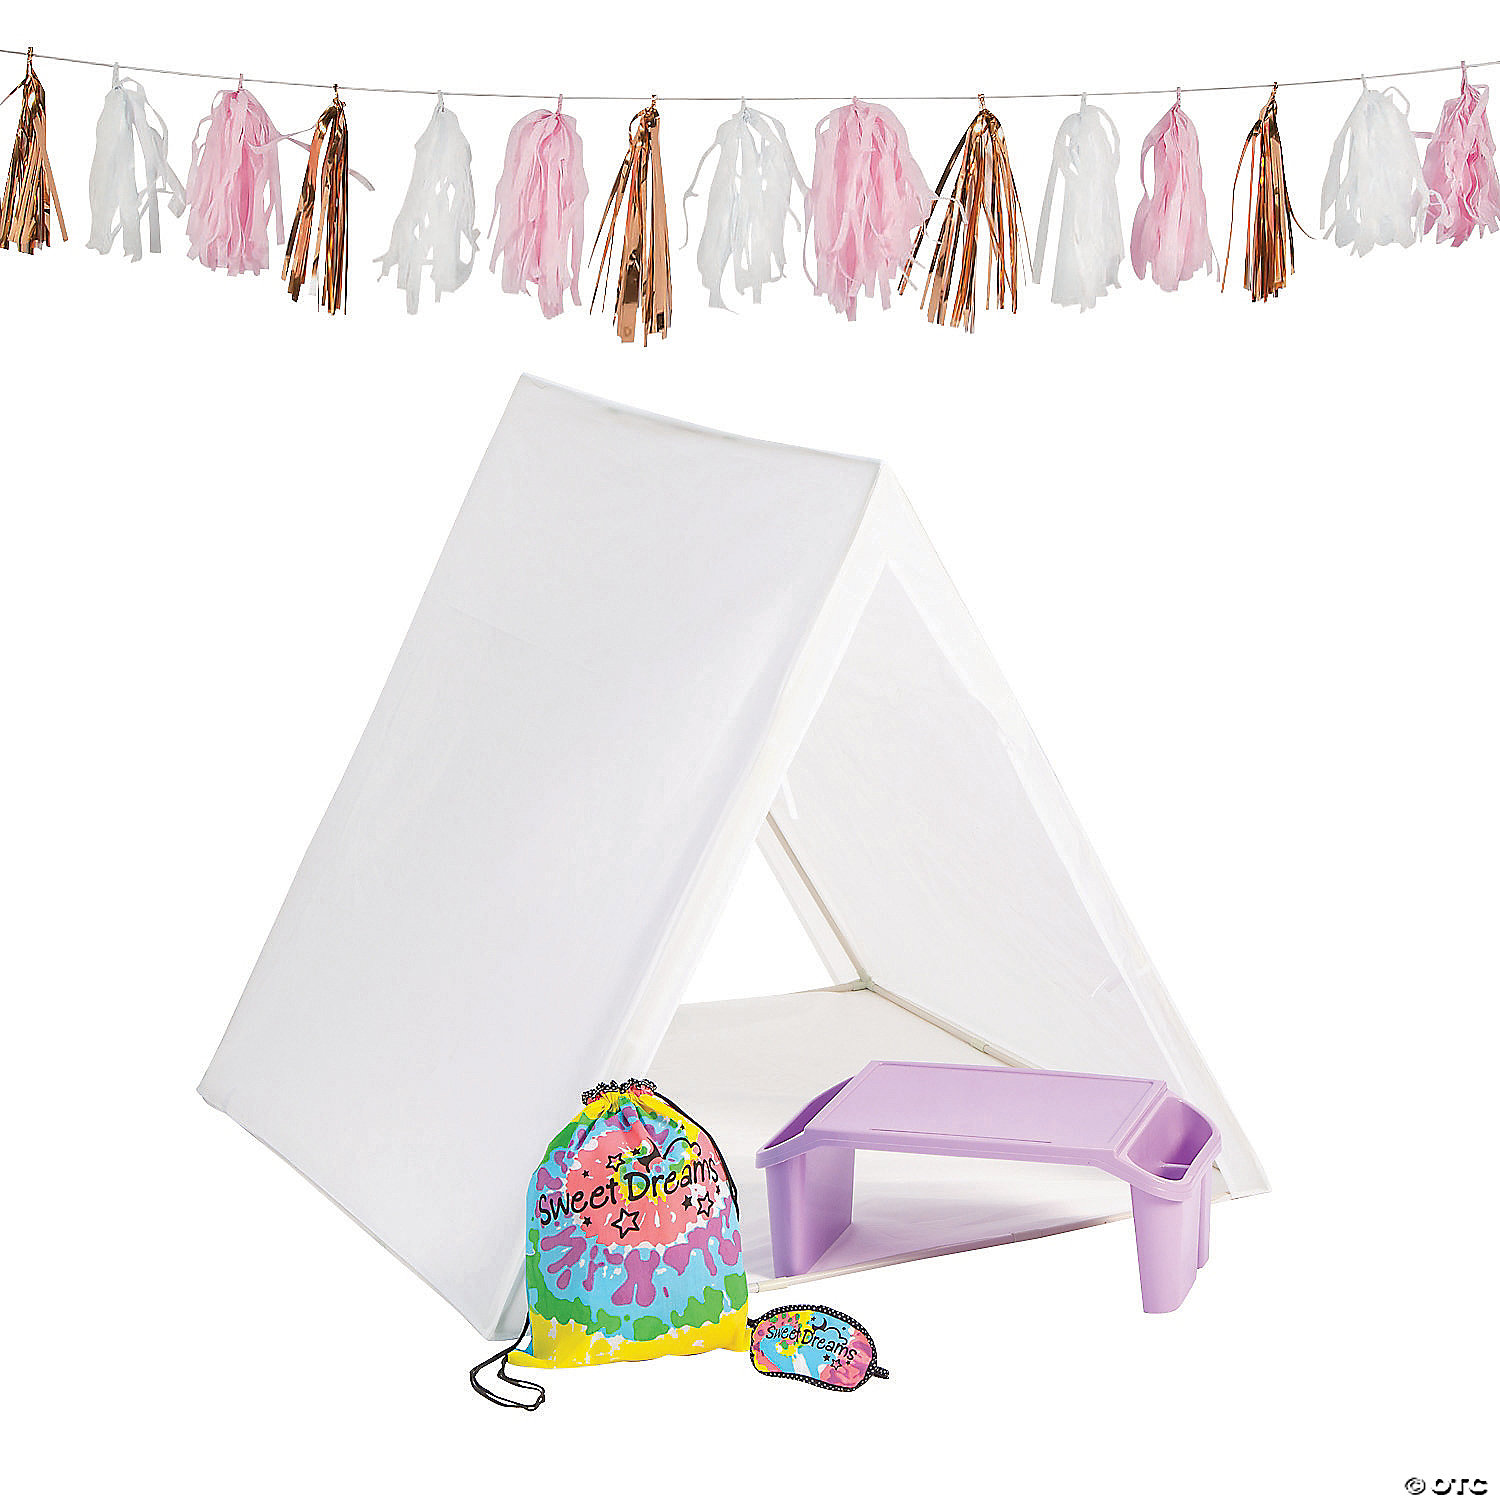 Our Generation Accessories - Puppies Camping Set » Fast Shipping